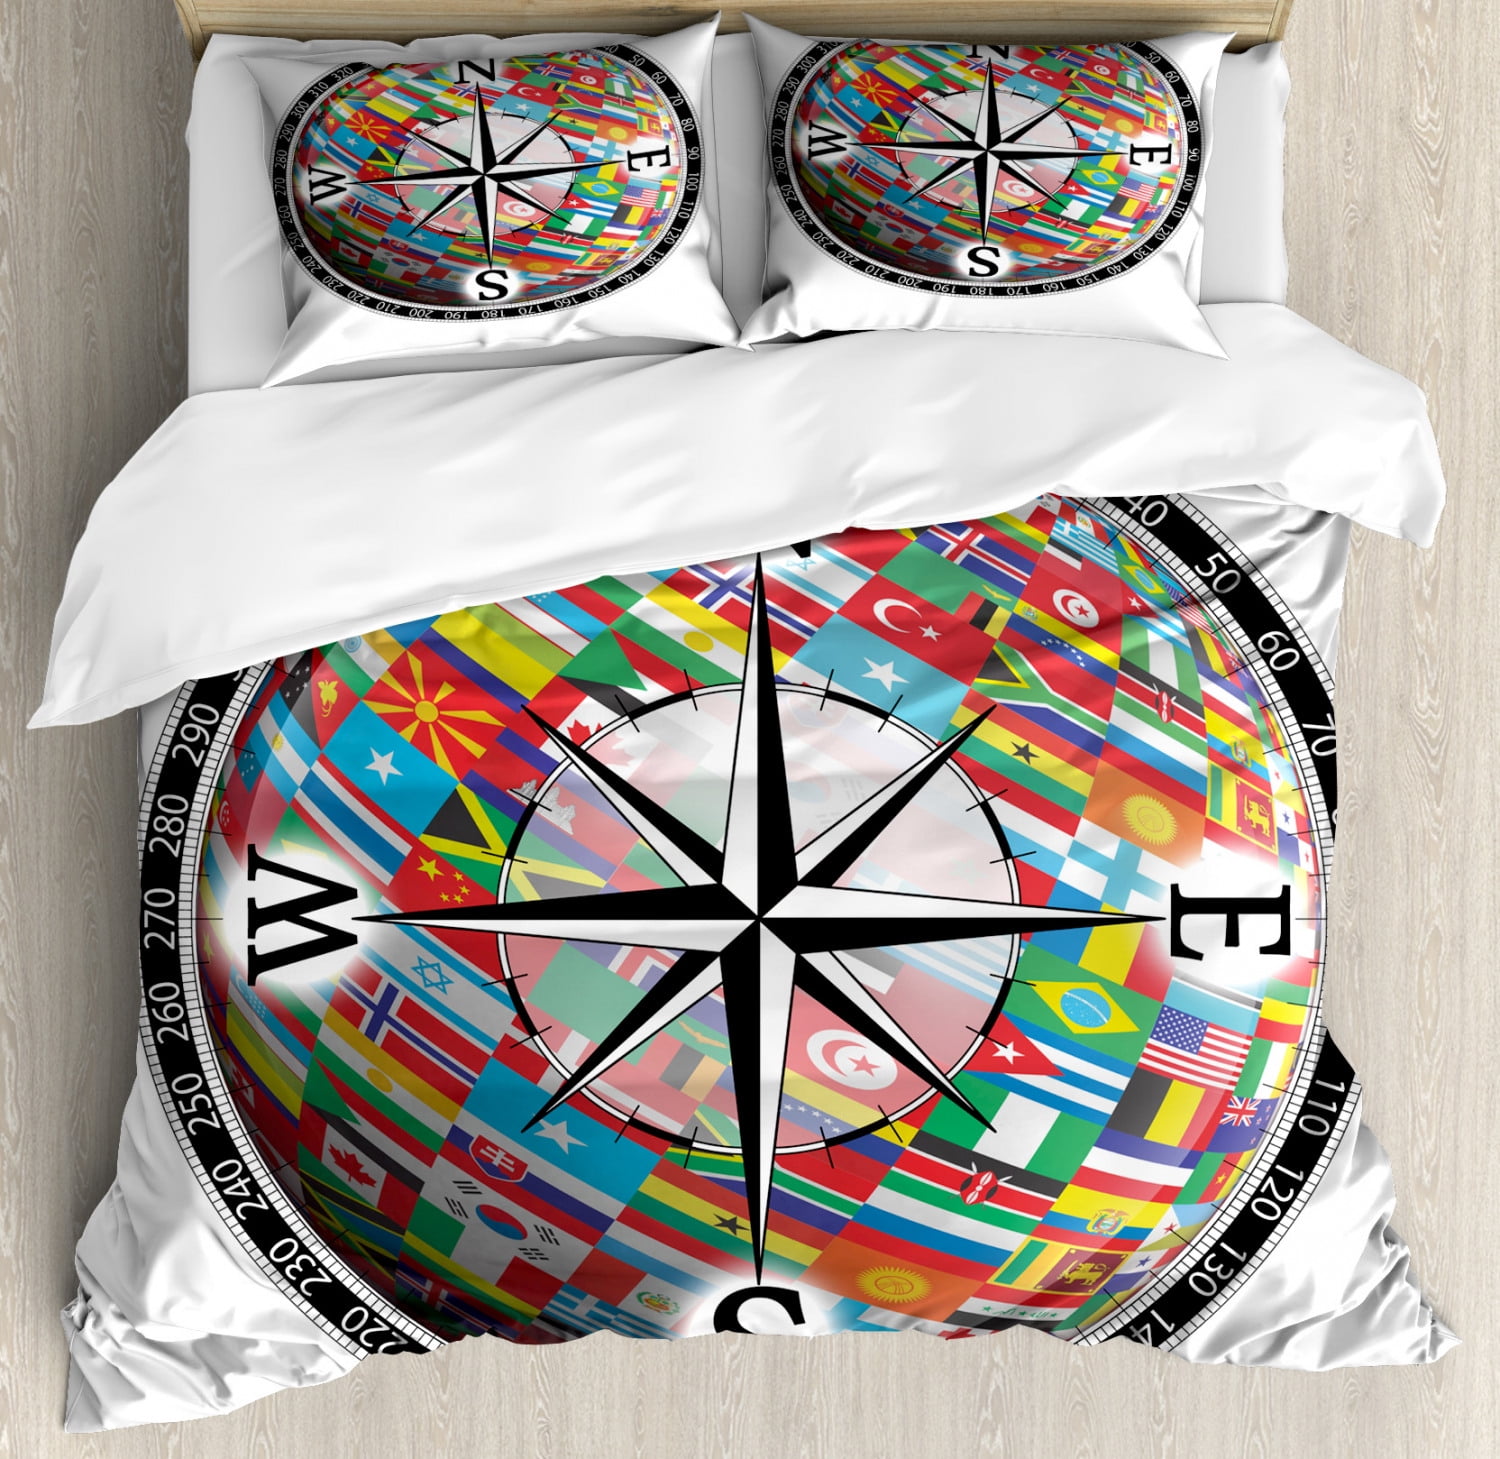 Compass Duvet Cover Set Flags Of The Globe Inside A Compass And